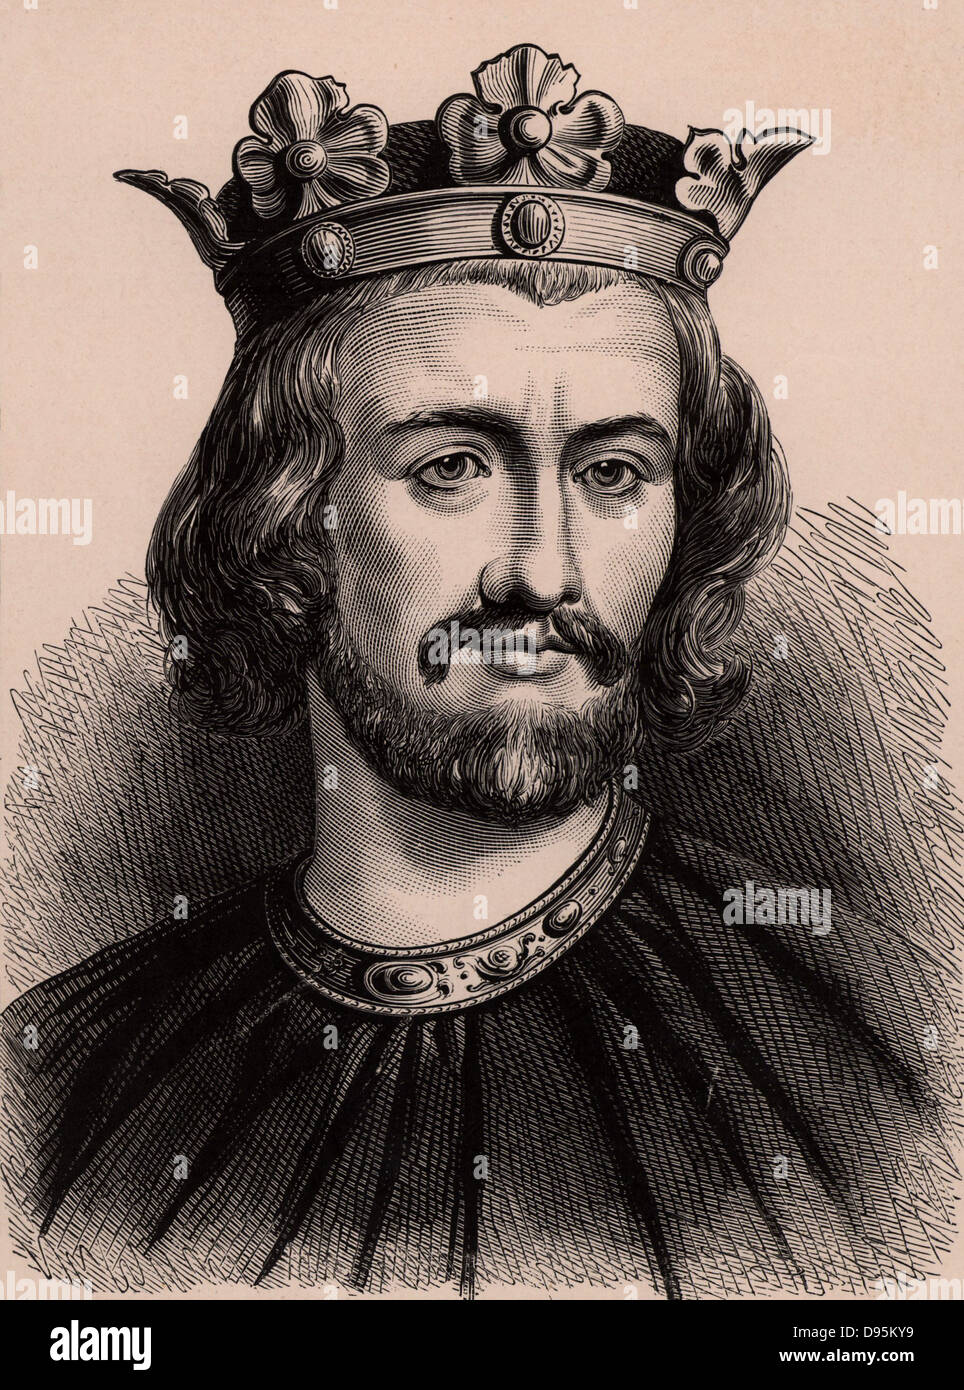 John (1167-1216) king of England from 1199; youngest son of Henry II and Eleanor of Aquitaine.  A member of the Angevin dynasty. Wood engraving c1900. Stock Photo